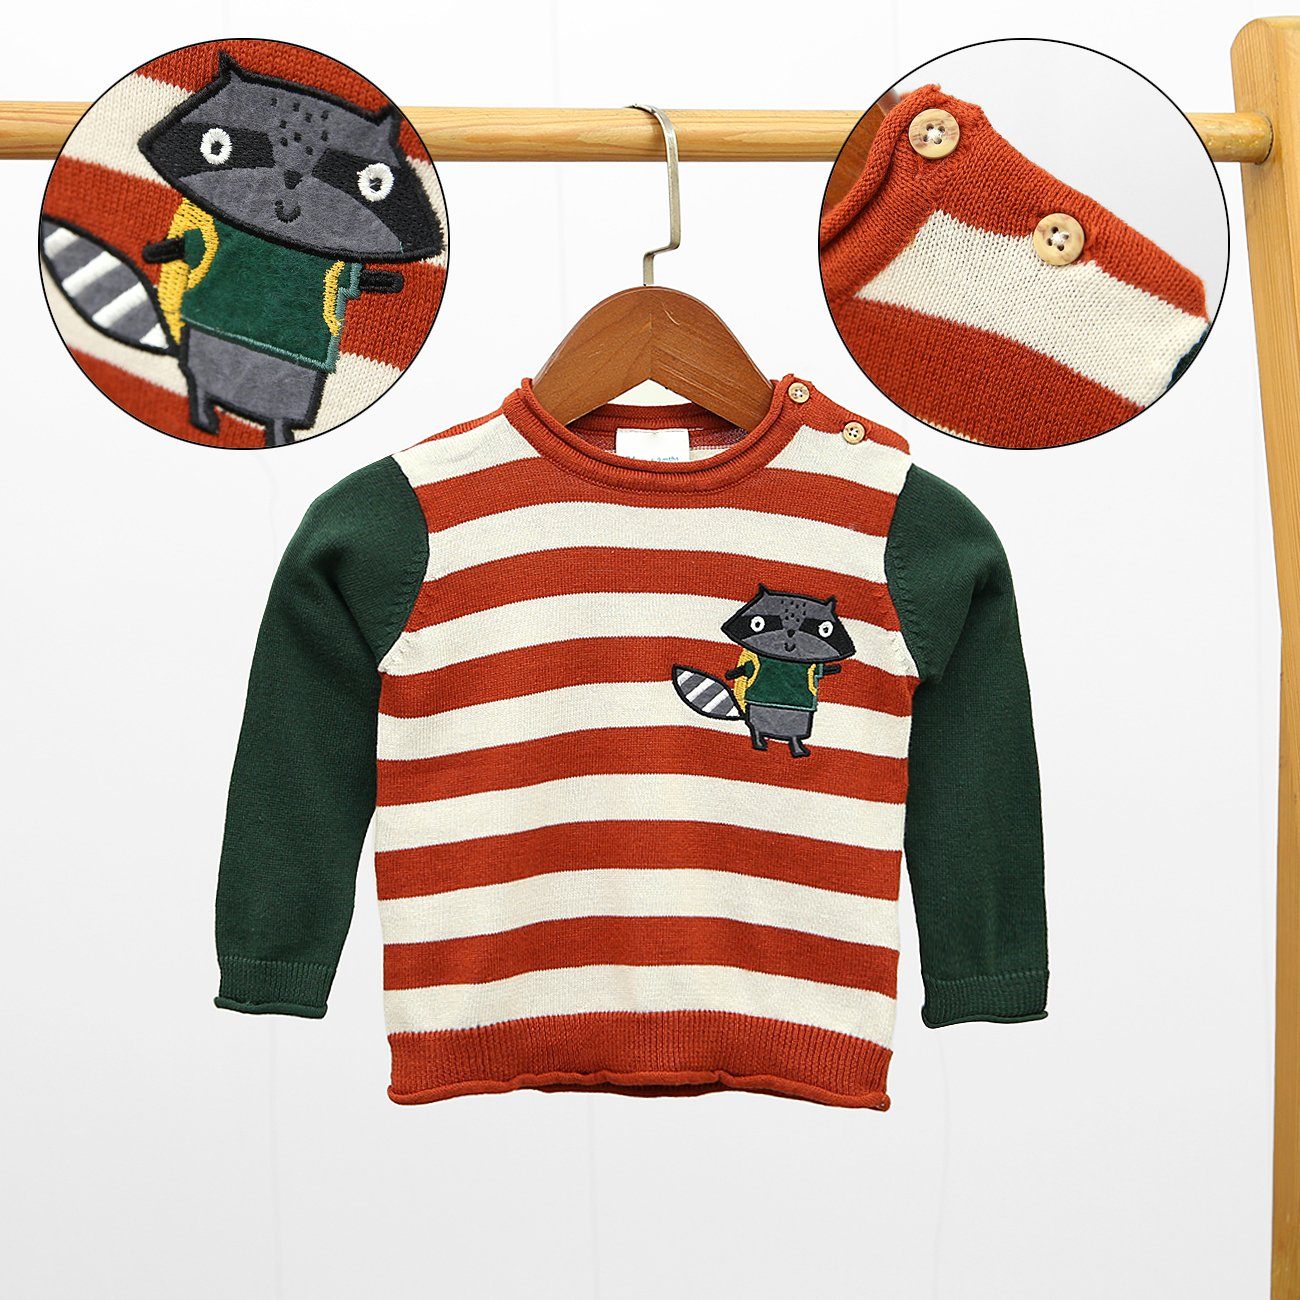 Exclusive Imported Embroided Knit-Sweater With Shoulder Button For Kids (22036)